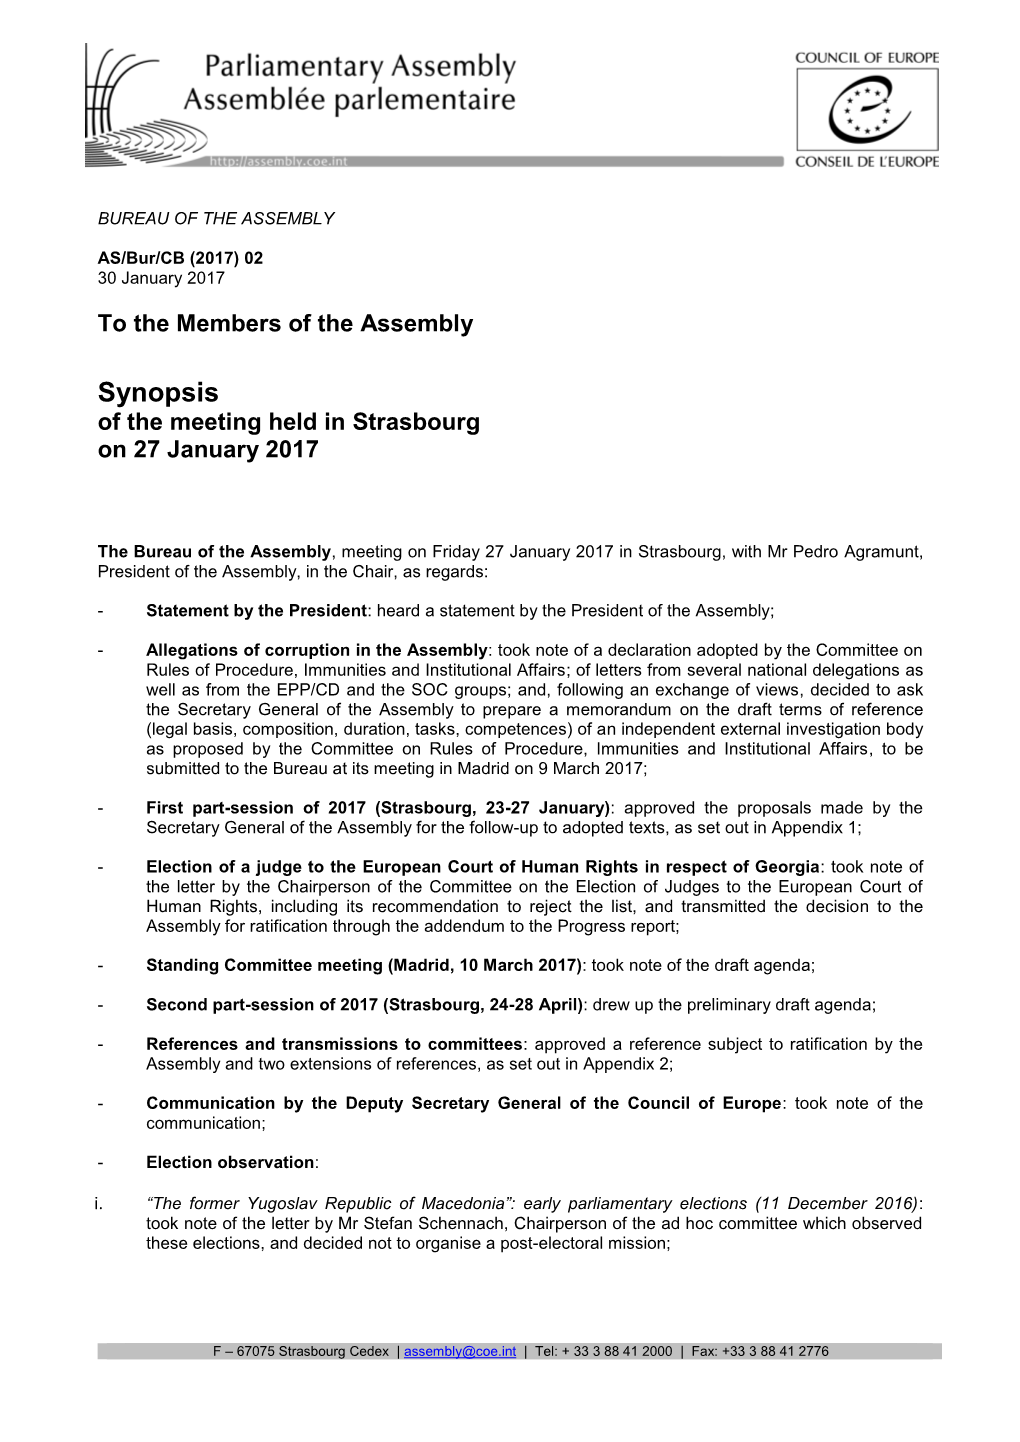 Synopsis of the Meeting Held in Strasbourg on 27 January 2017